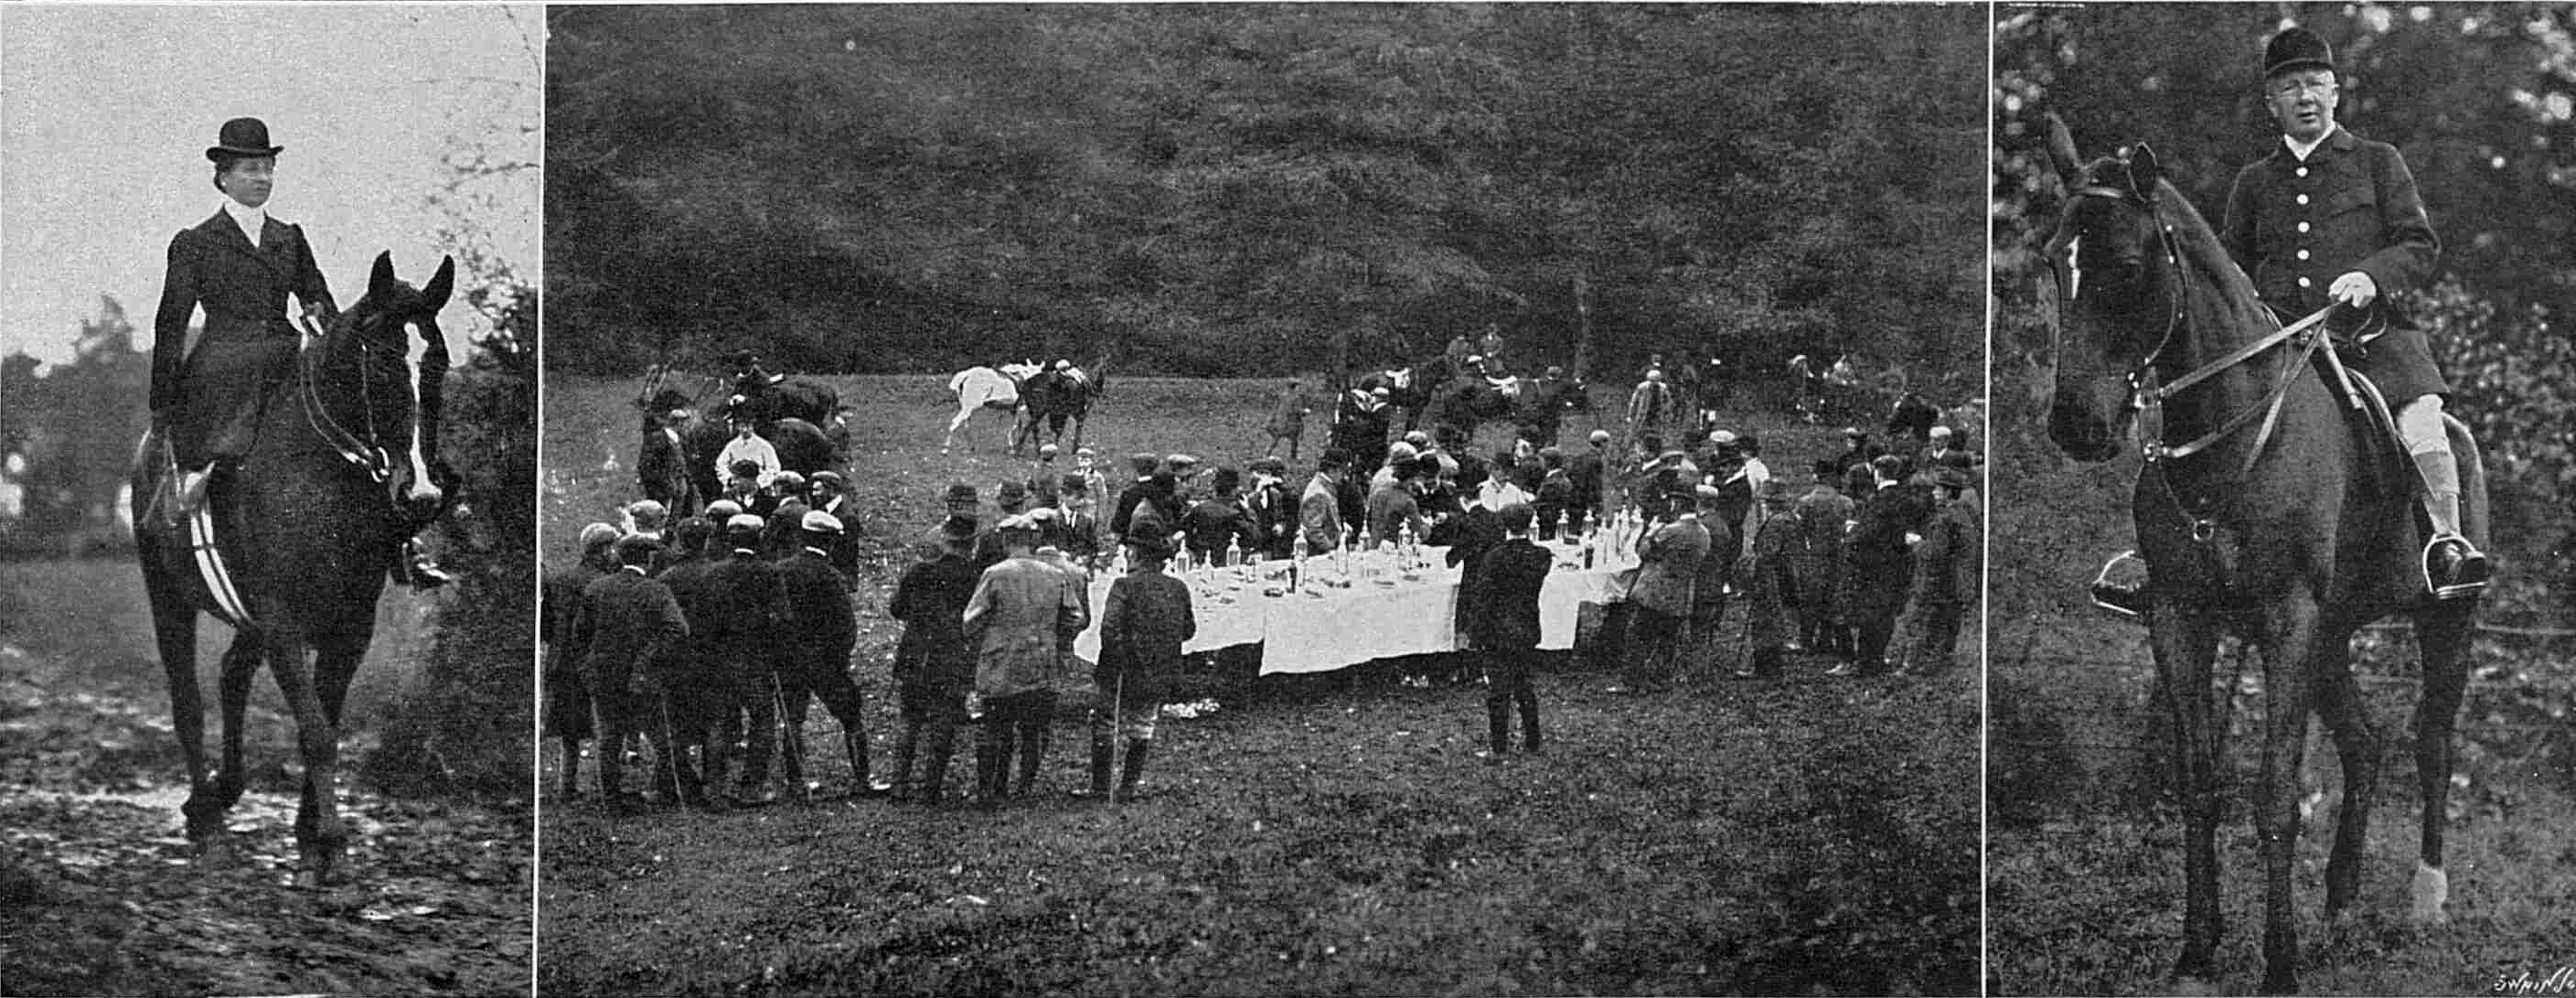 1909 opening of the Tetcott Hunt meet at Hornacott with Jane Shuker on the left and Charles on the right.